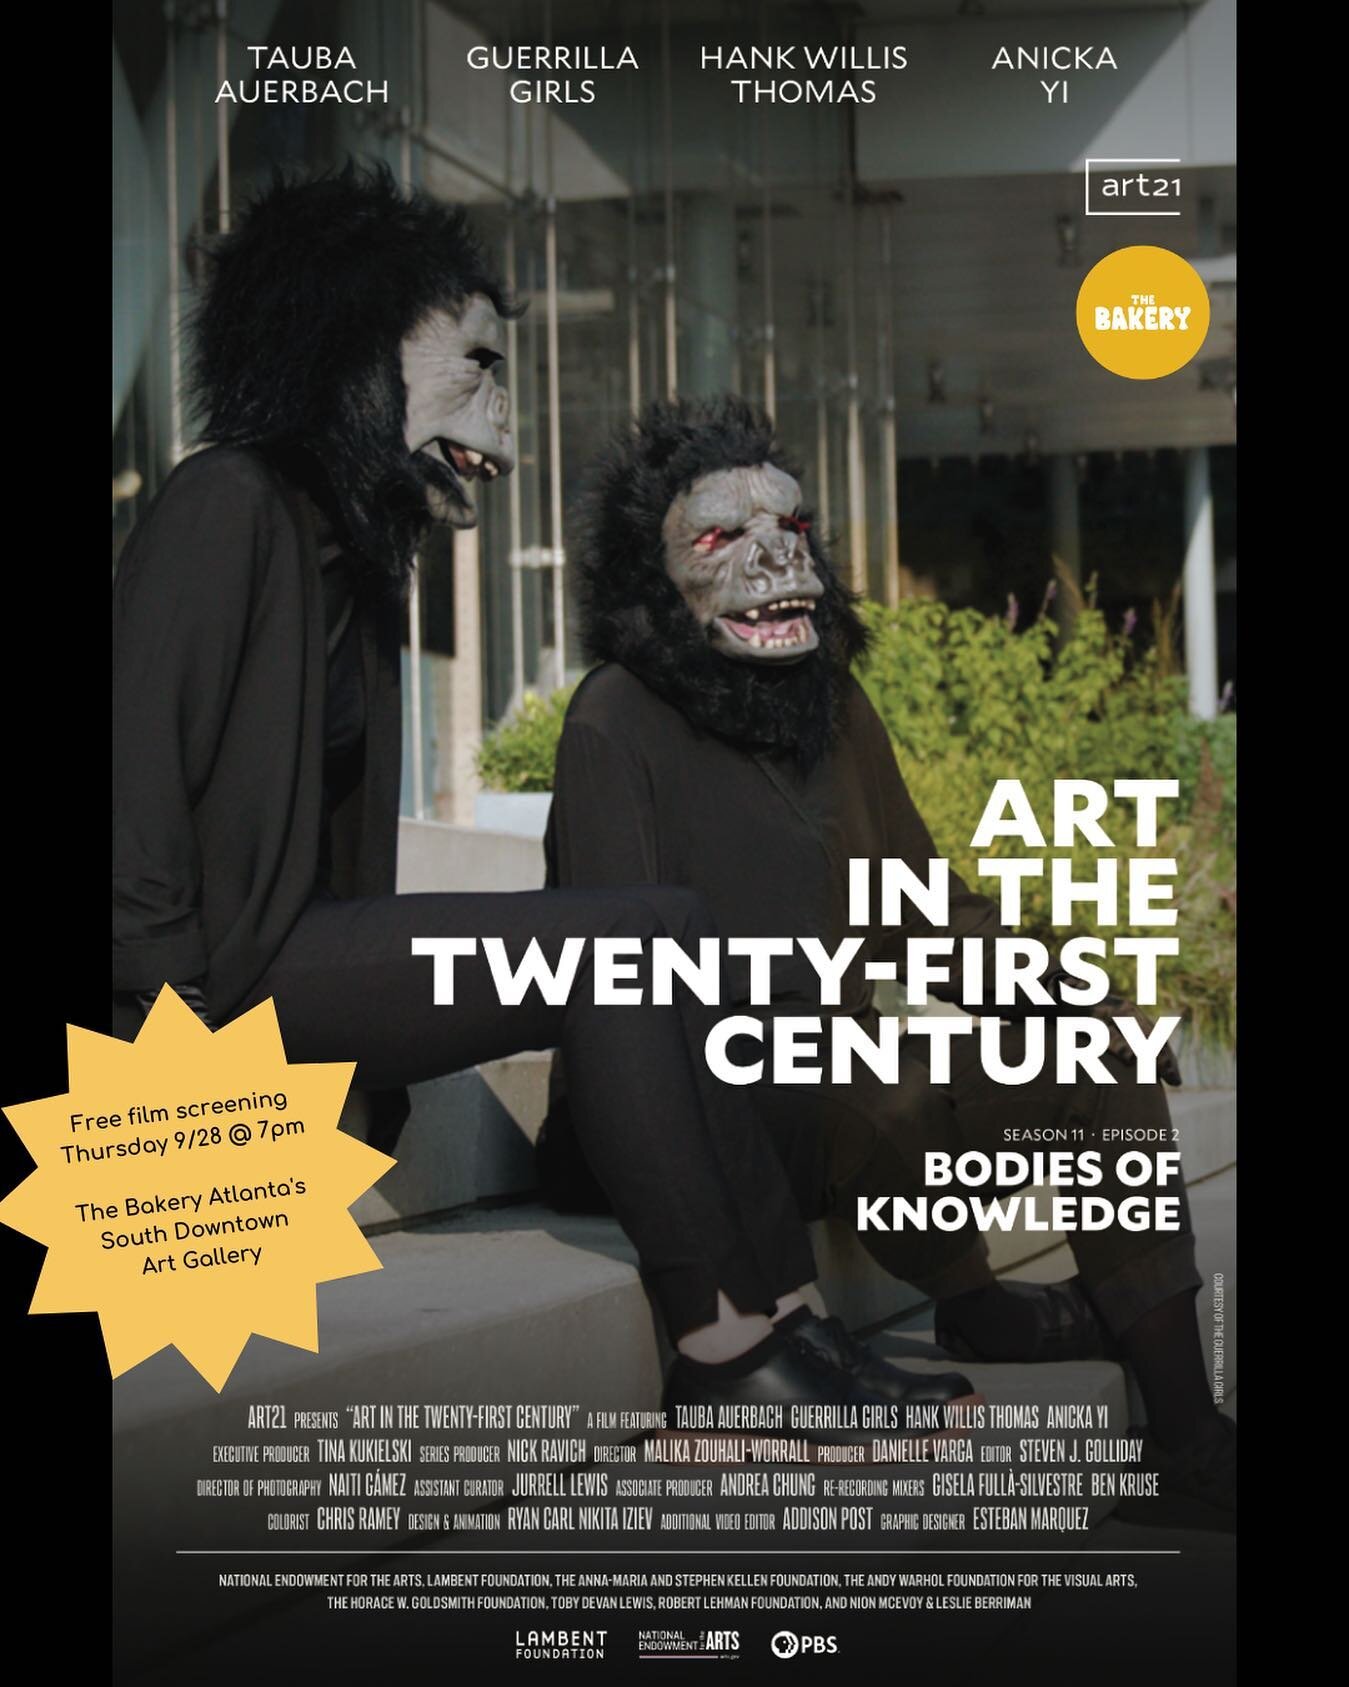 Join The Bakery tomorrow night for a free screening of &ldquo;Bodies of Knowledge&rdquo; from @art21&rsquo;s acclaimed PBS series, &ldquo;Art in the Twenty-First Century&rdquo; as part of the Art21 Screening Society.

📅Thursday 9/28 @ 7pm at The Bak